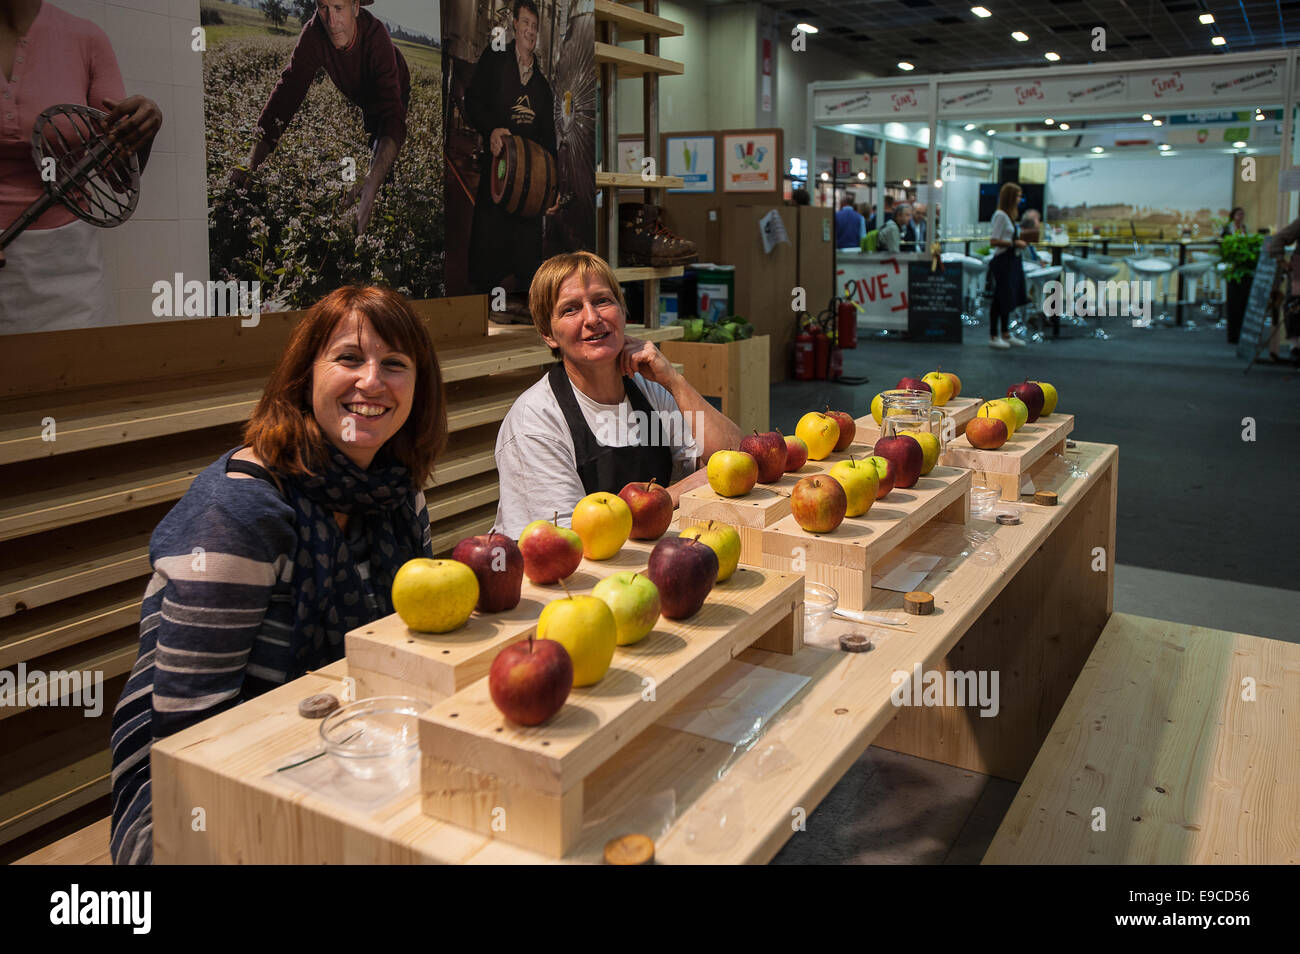 Turin, Piémont, Italie. 24 Oct, 2014. Le Salone del Gusto e Terra Madre - Torino Lingotto -23 - 27 octobre 2014 - Stand Regional du Trentin - Pommes Crédit : Realy Easy Star/Alamy Live News Banque D'Images